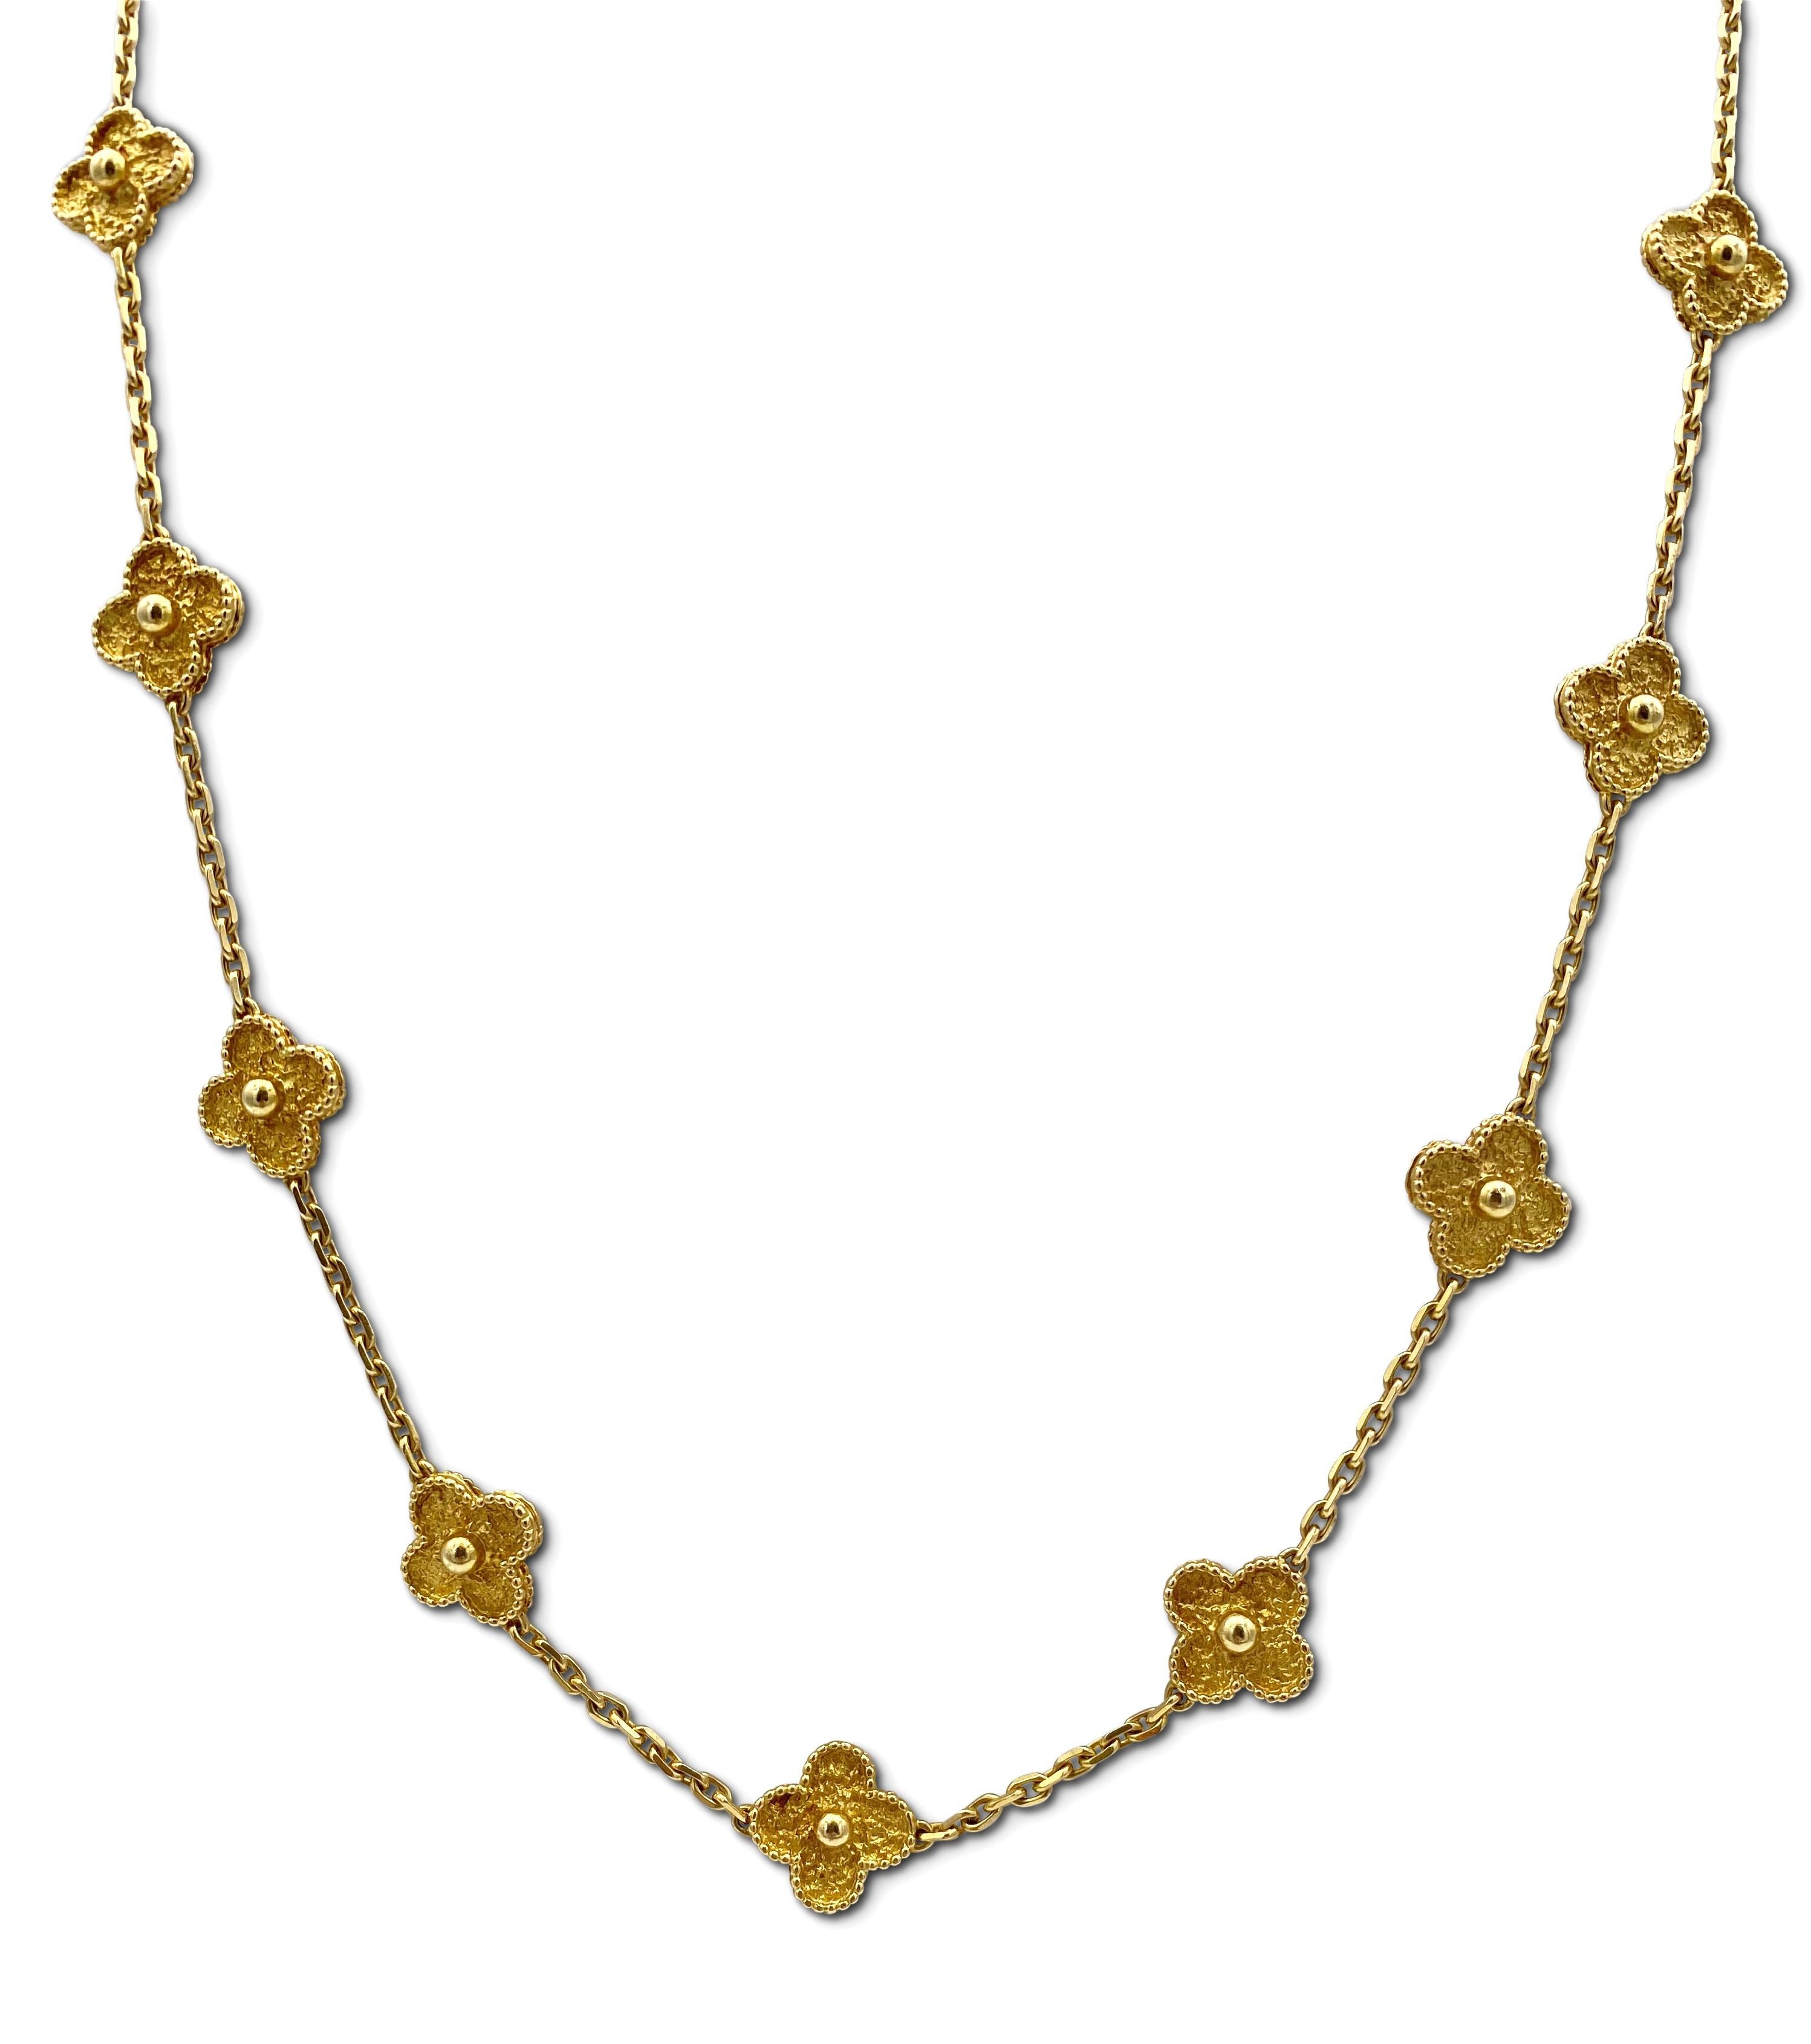 Authentic Van Cleef & Arpels 18 karat yellow gold long necklace featuring 20 clover leaf inspired motifs. The necklace does not come with original Van Cleef & Arpels box or papers. Marked VCA 750, CL 58457

18k Yellow Gold
31.5 in long
Weight: